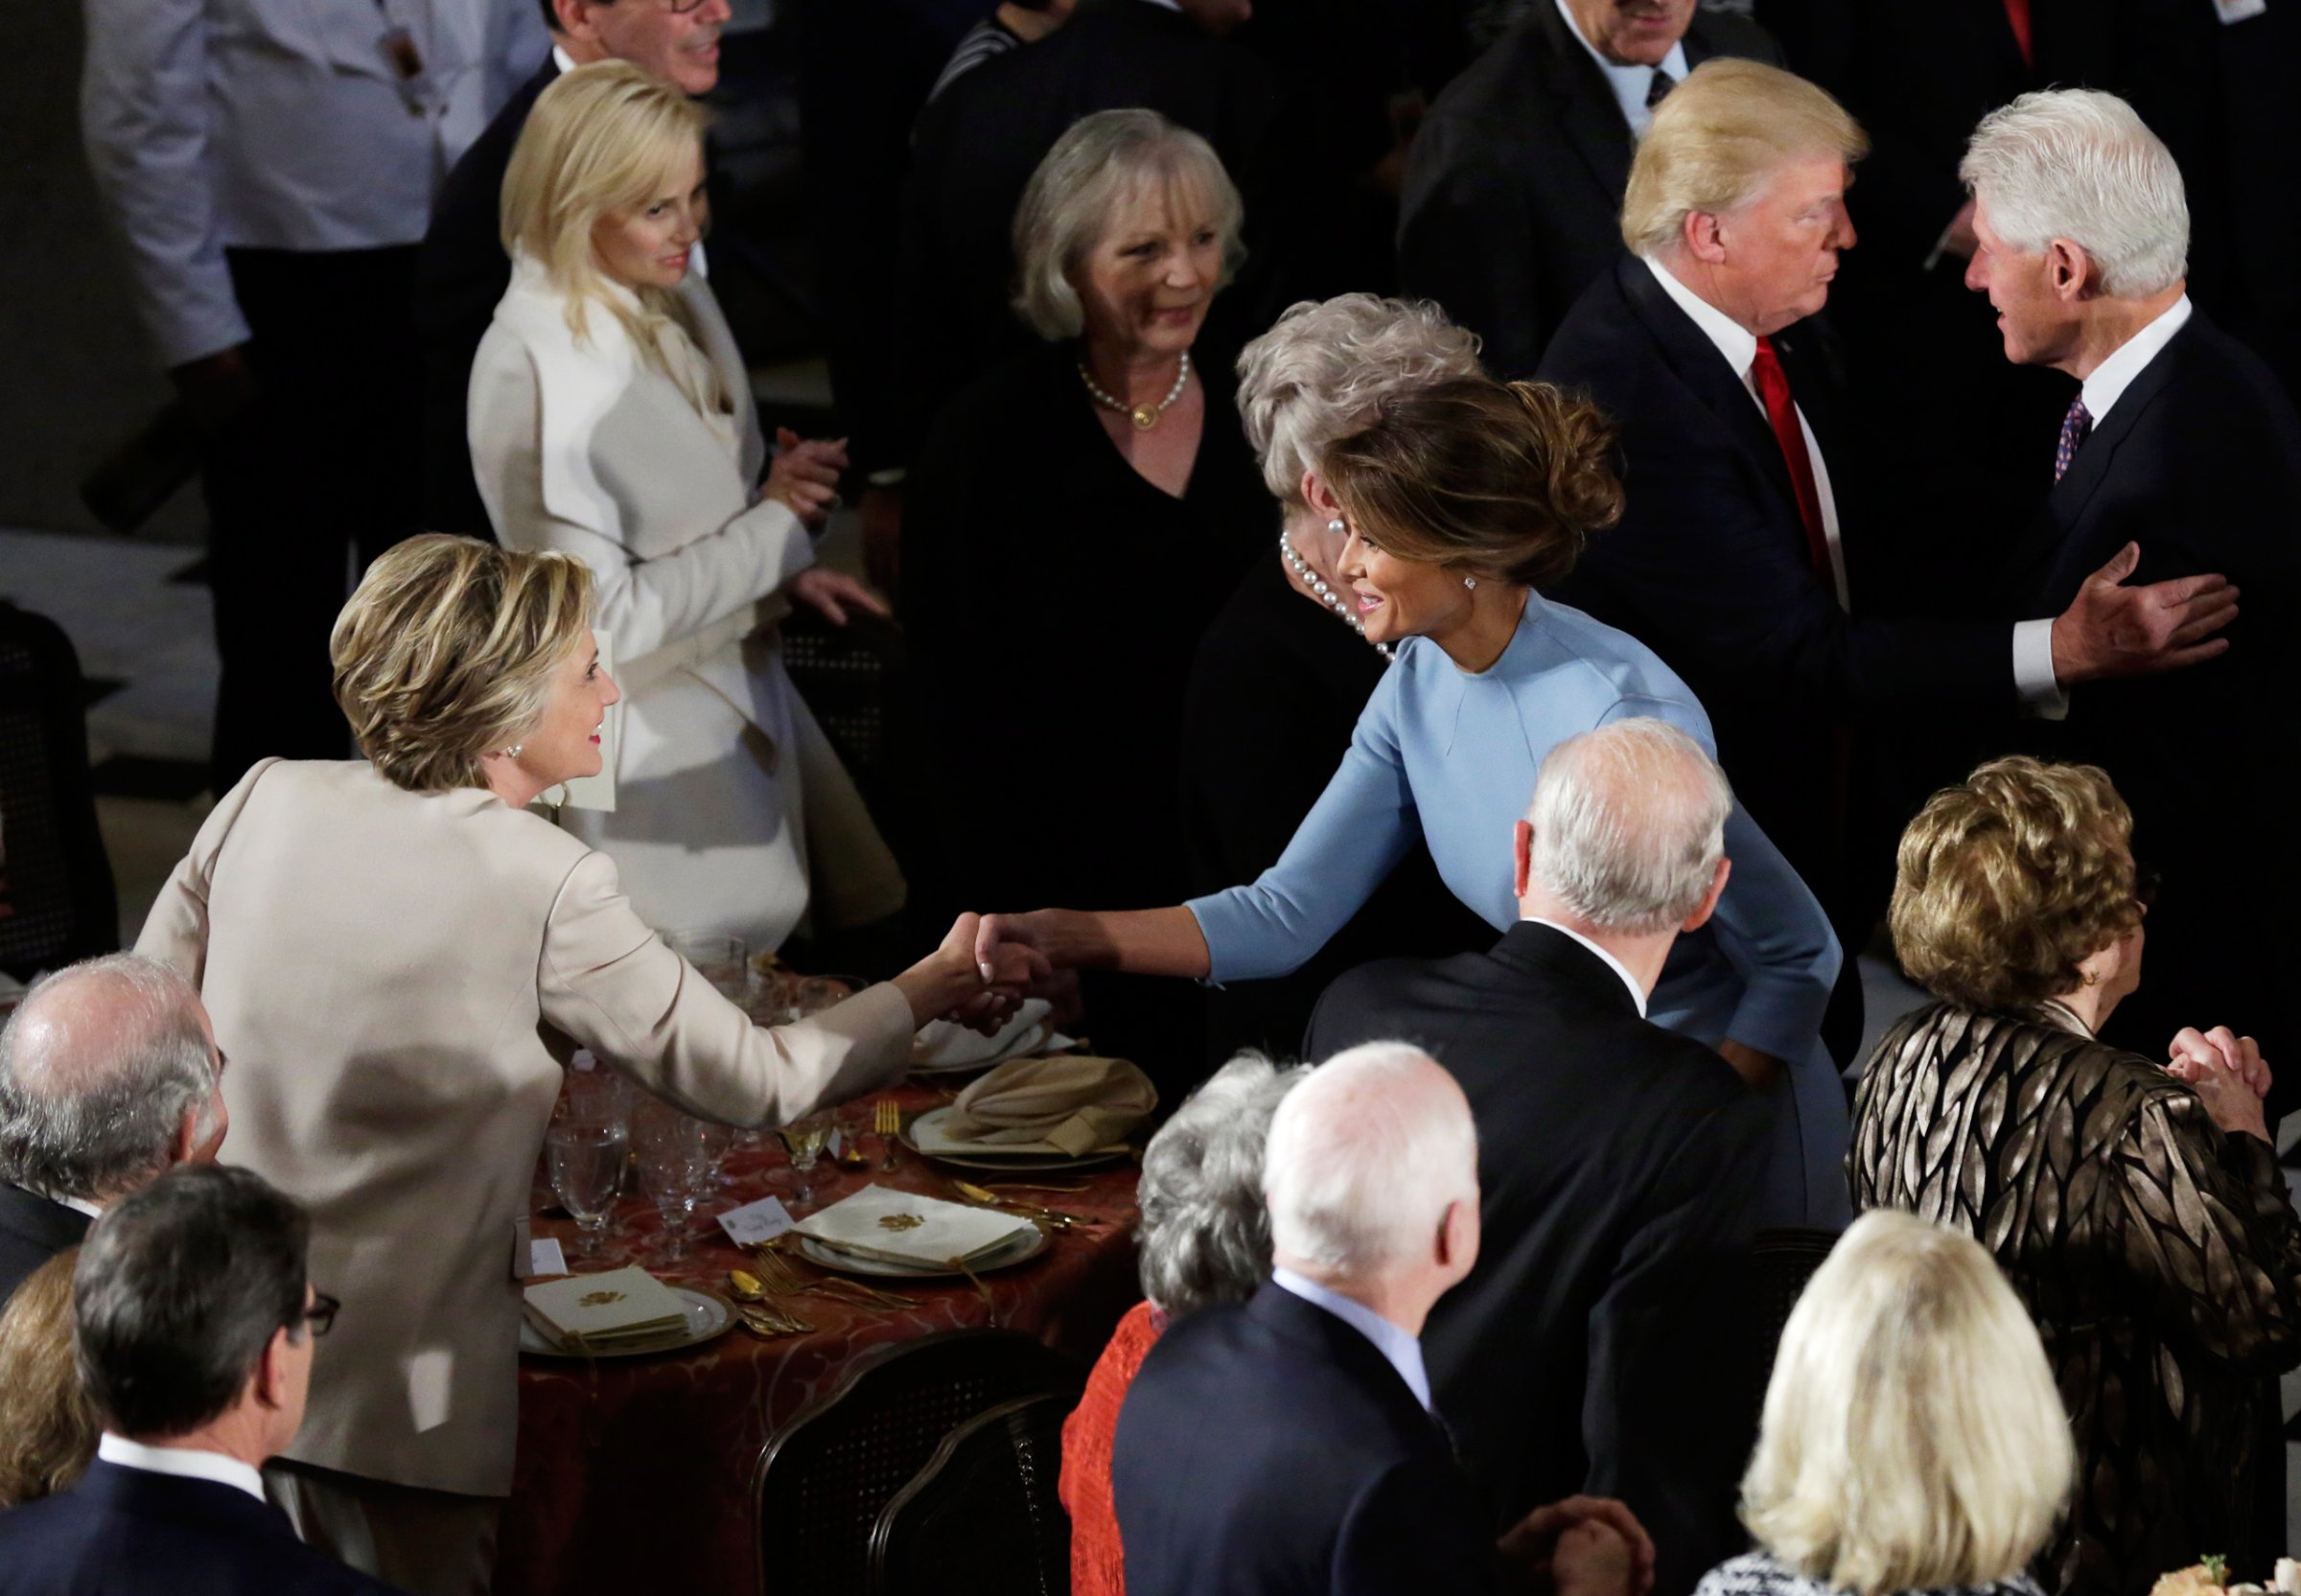 Former Democratic U.S. presidential nominee Hillary Clinton greets First lady Melania Trump as her husband Bill Clinton speaks with President Donald Trump during the Inaugural luncheon at the National Statuary Hall in Washington, U.S, January 20, 2017. REUTERS/Yuri Gripas - RTSWJZE